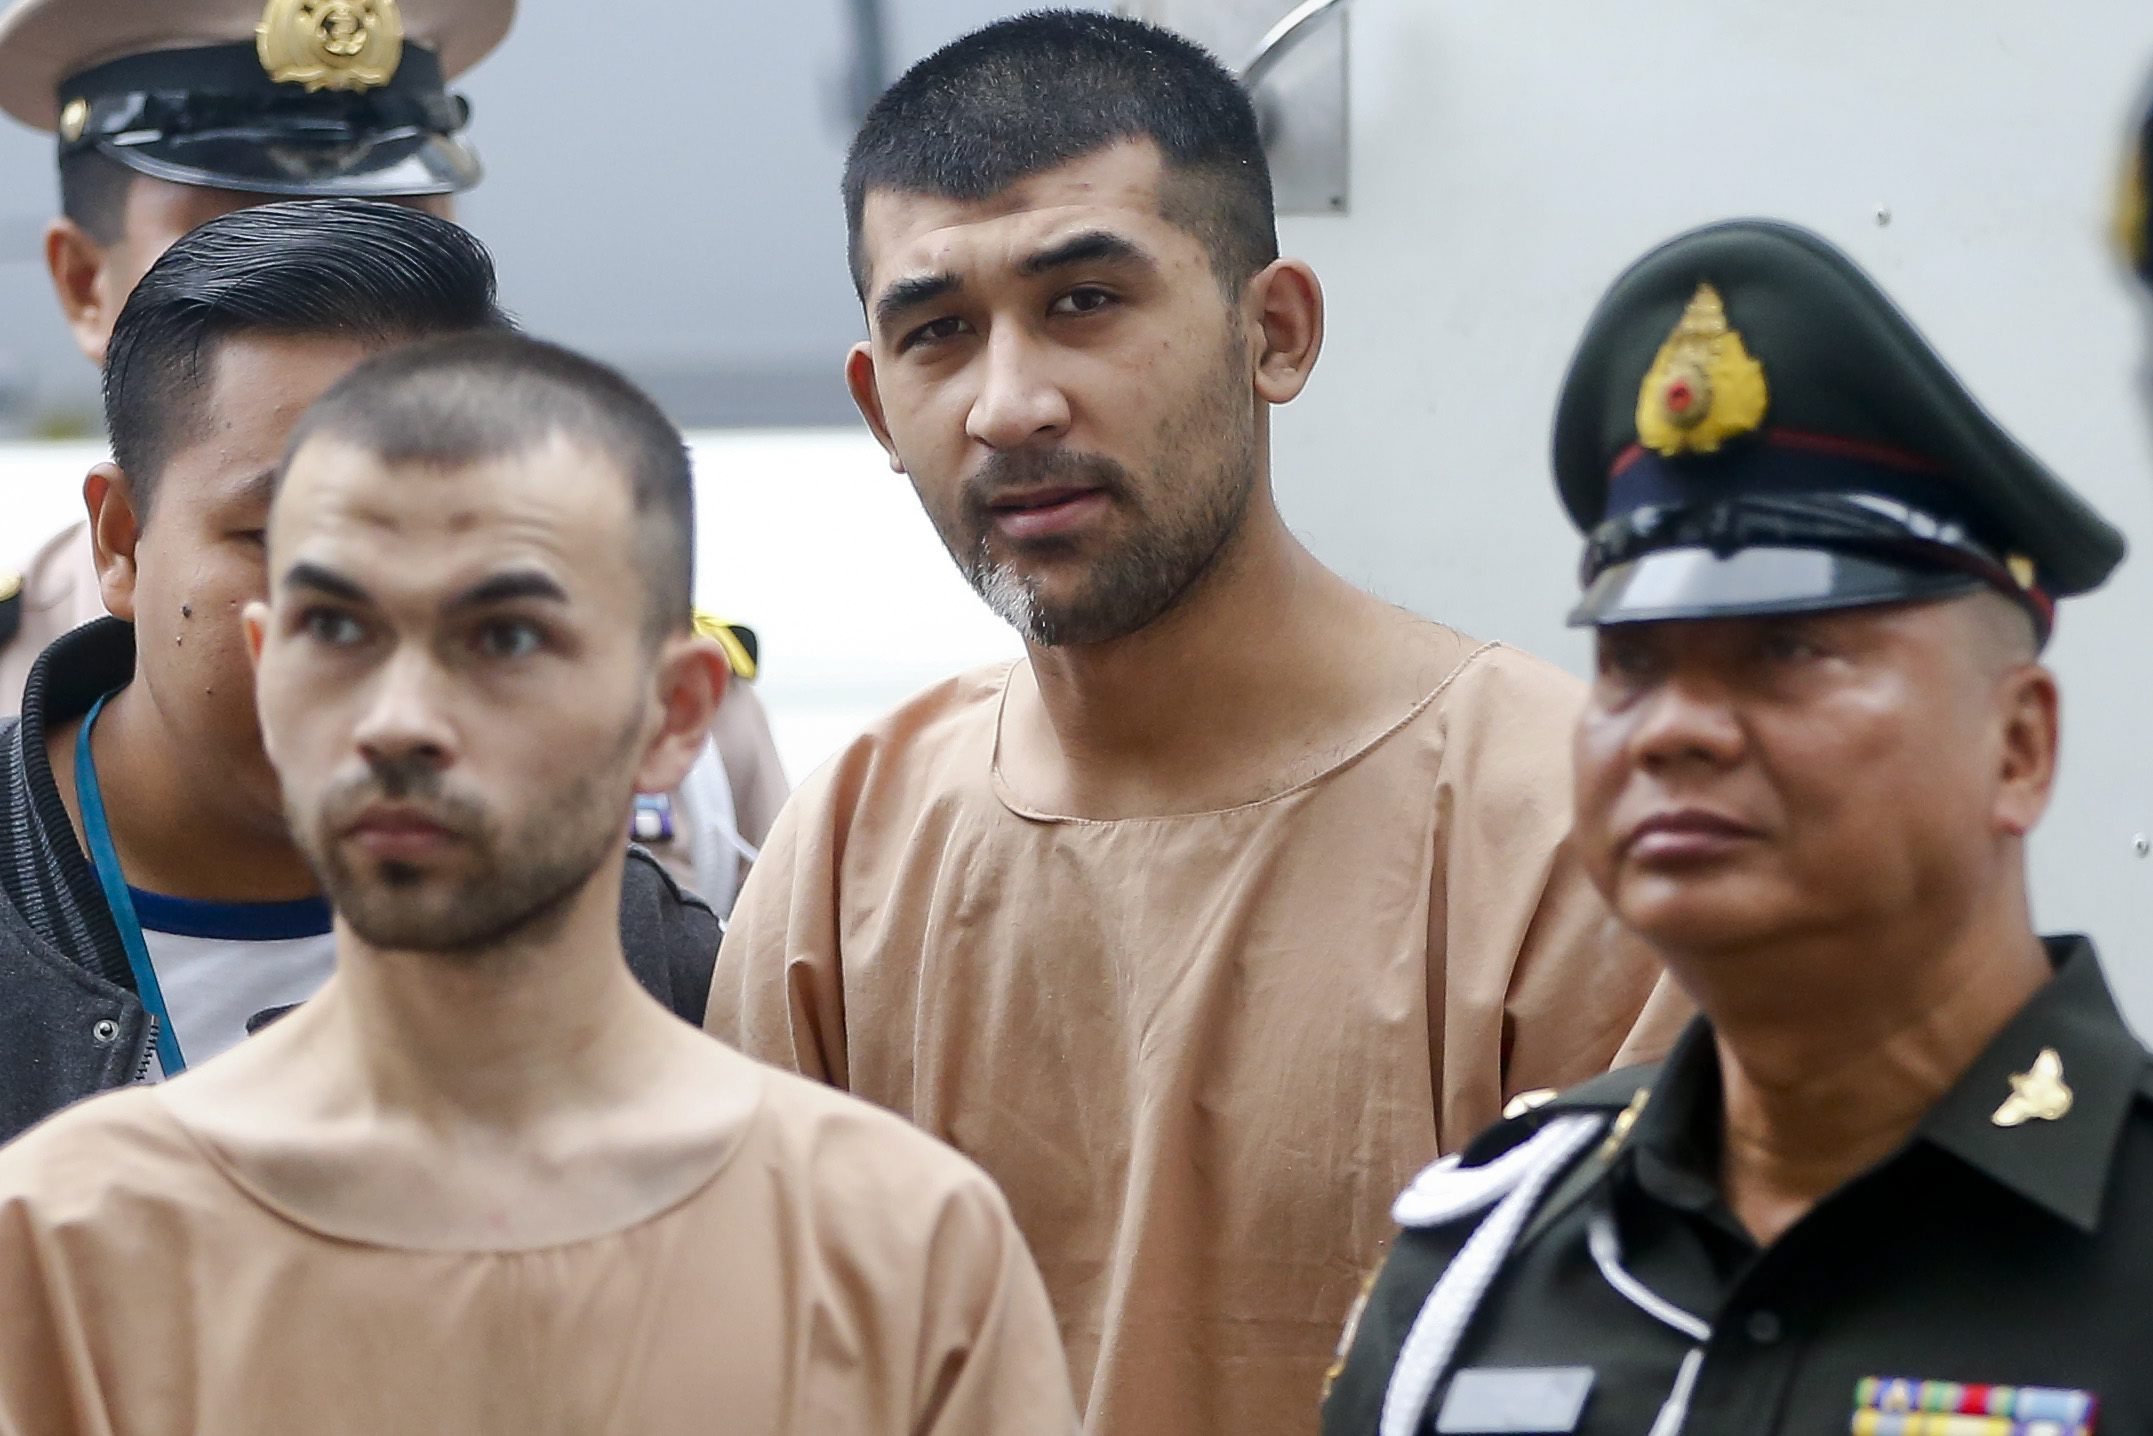 epa05163903 Erawan Shrine's bombing main suspect, identified by Thai police as Adem Karadag (L, front), and Yusufu Mieraili (C, back) are escorted by officers and prison personnel to the Military Court, in Bangkok, Thailand, 16 February 2016. A military court in Thailand on 24 November 2015, charged two men accused of carrying out a deadly explosion in central Bangkok in August. The bomb attack at a Hindu shrine killed 20 people, mostly tourists, and injured more than 120. Adem Karadag and Yusufu Mieraili each face 10 charges, including premeditated murder, but not terrorism, Thai media reported. The two suspects arrived at the military court in Bangkok on 16 February 2016, in handcuffs and escorted by the police. Karadag, identified initially by the name Bilal Muhammed, and Mieraili have been detained at an army base since they were arrested in August and September, respectively. Adem Karadag has retracted his confession of being involved in the attack claiming he was coerced into con